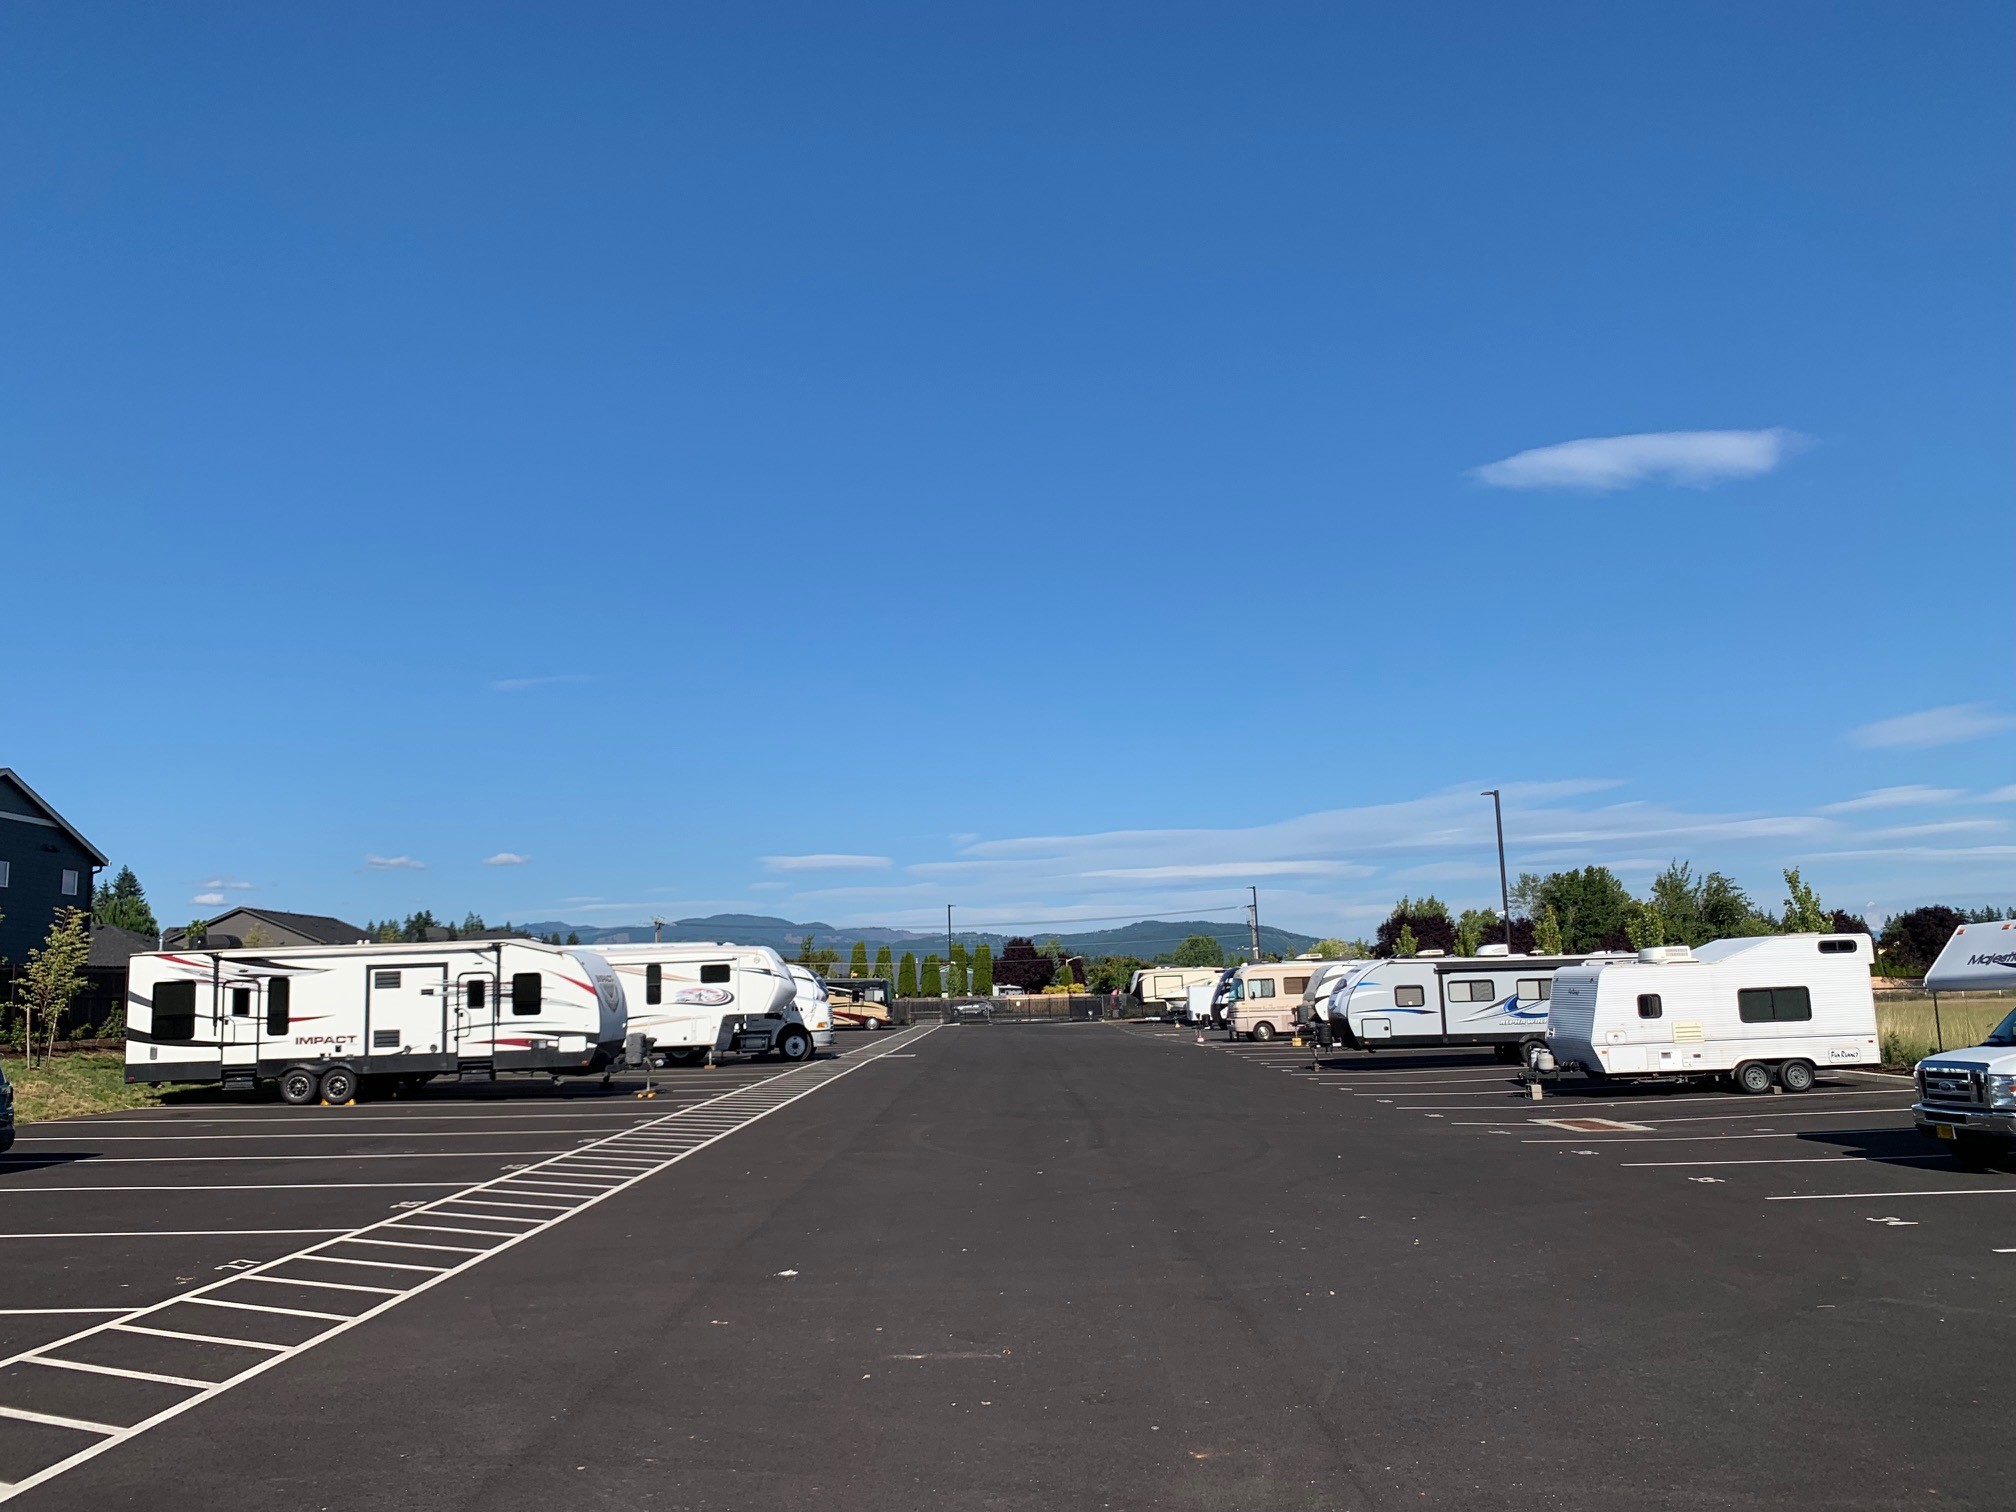 The Truth About RV Storage as a Passive Income Investment